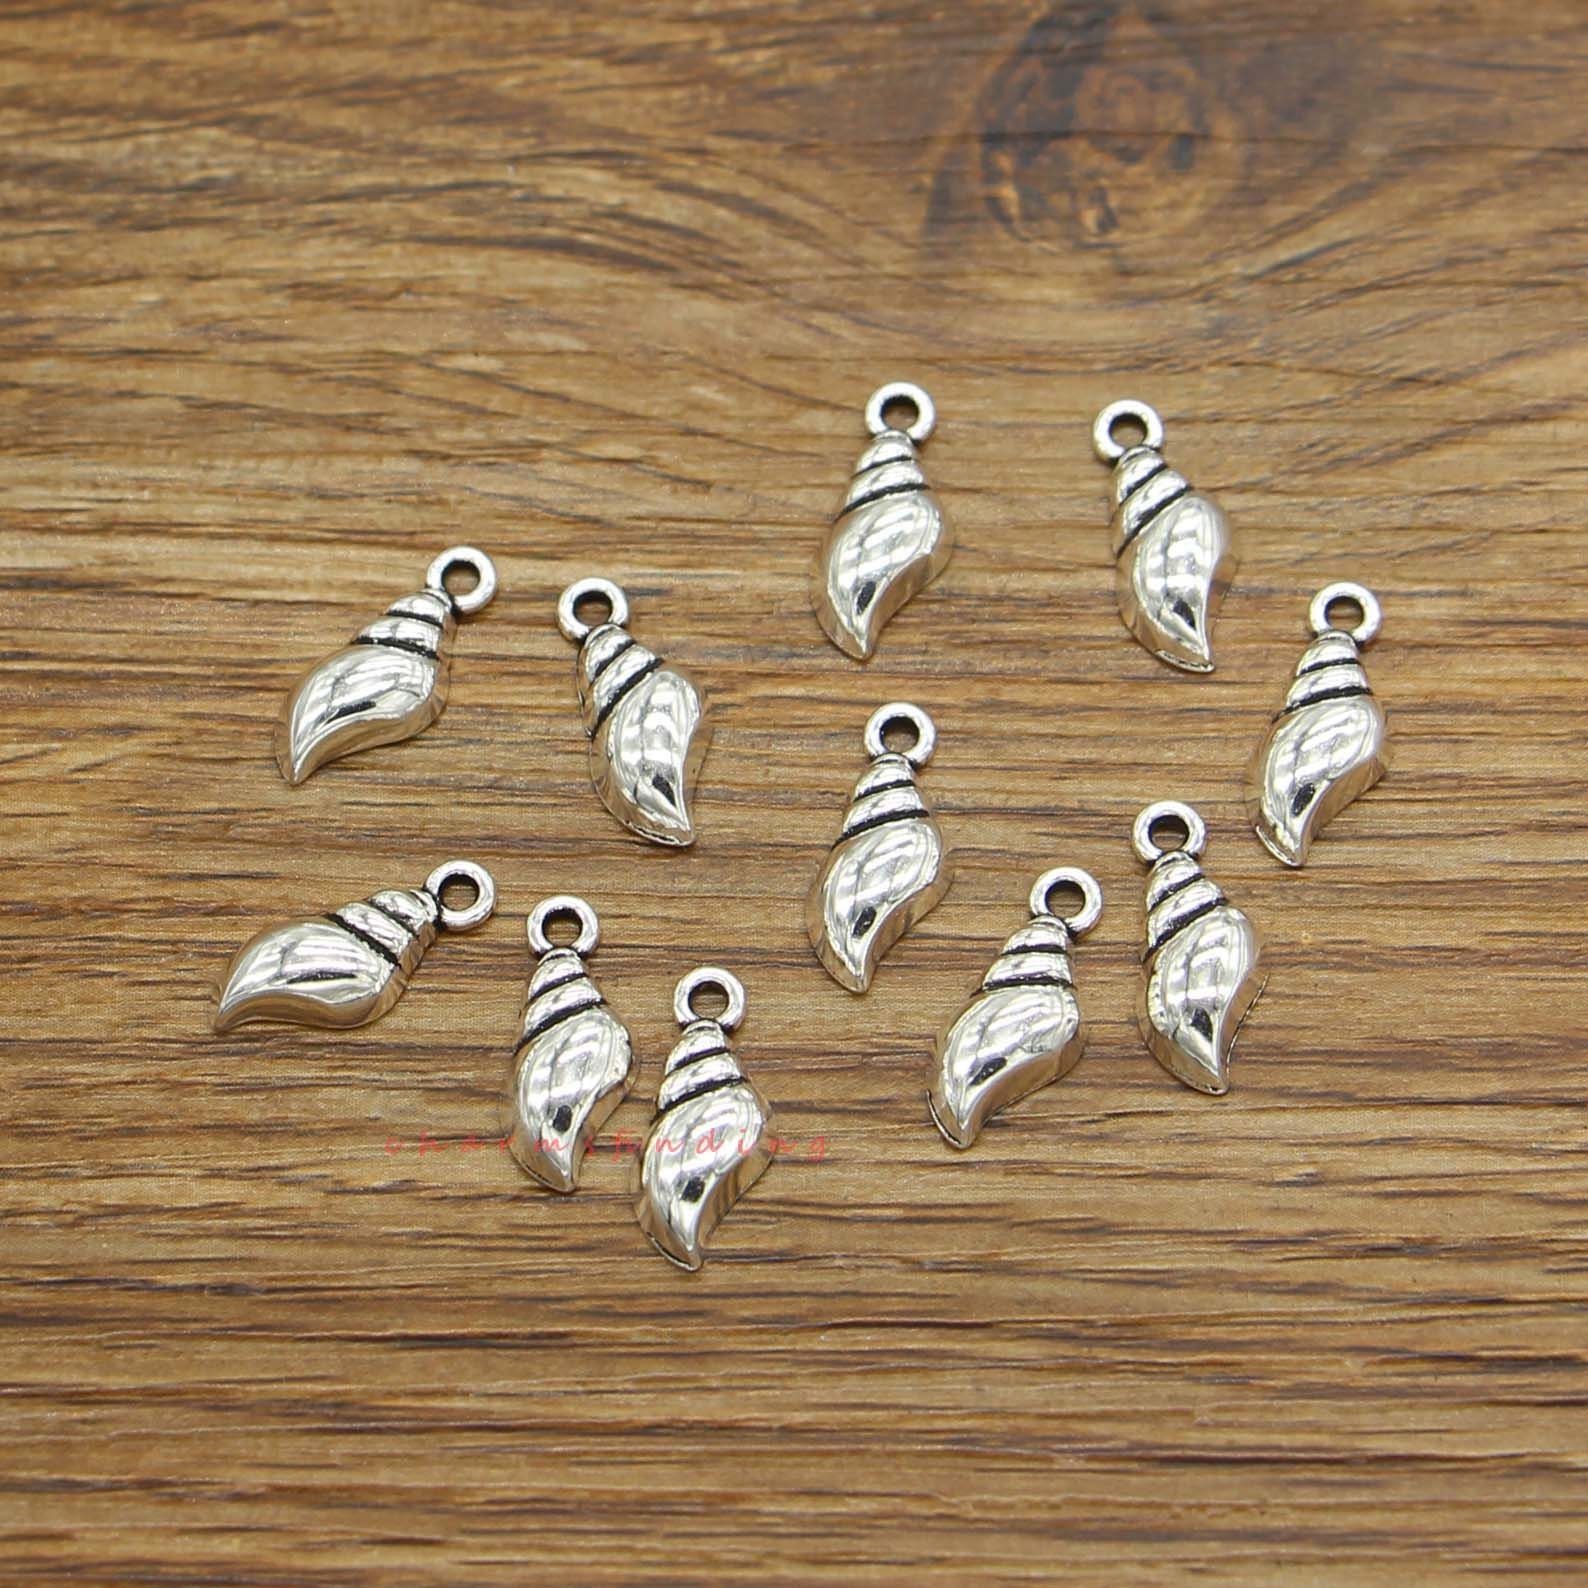 100pcs Seashell Charms Conch Charms Antique Silver Tone 7x16mm - Etsy